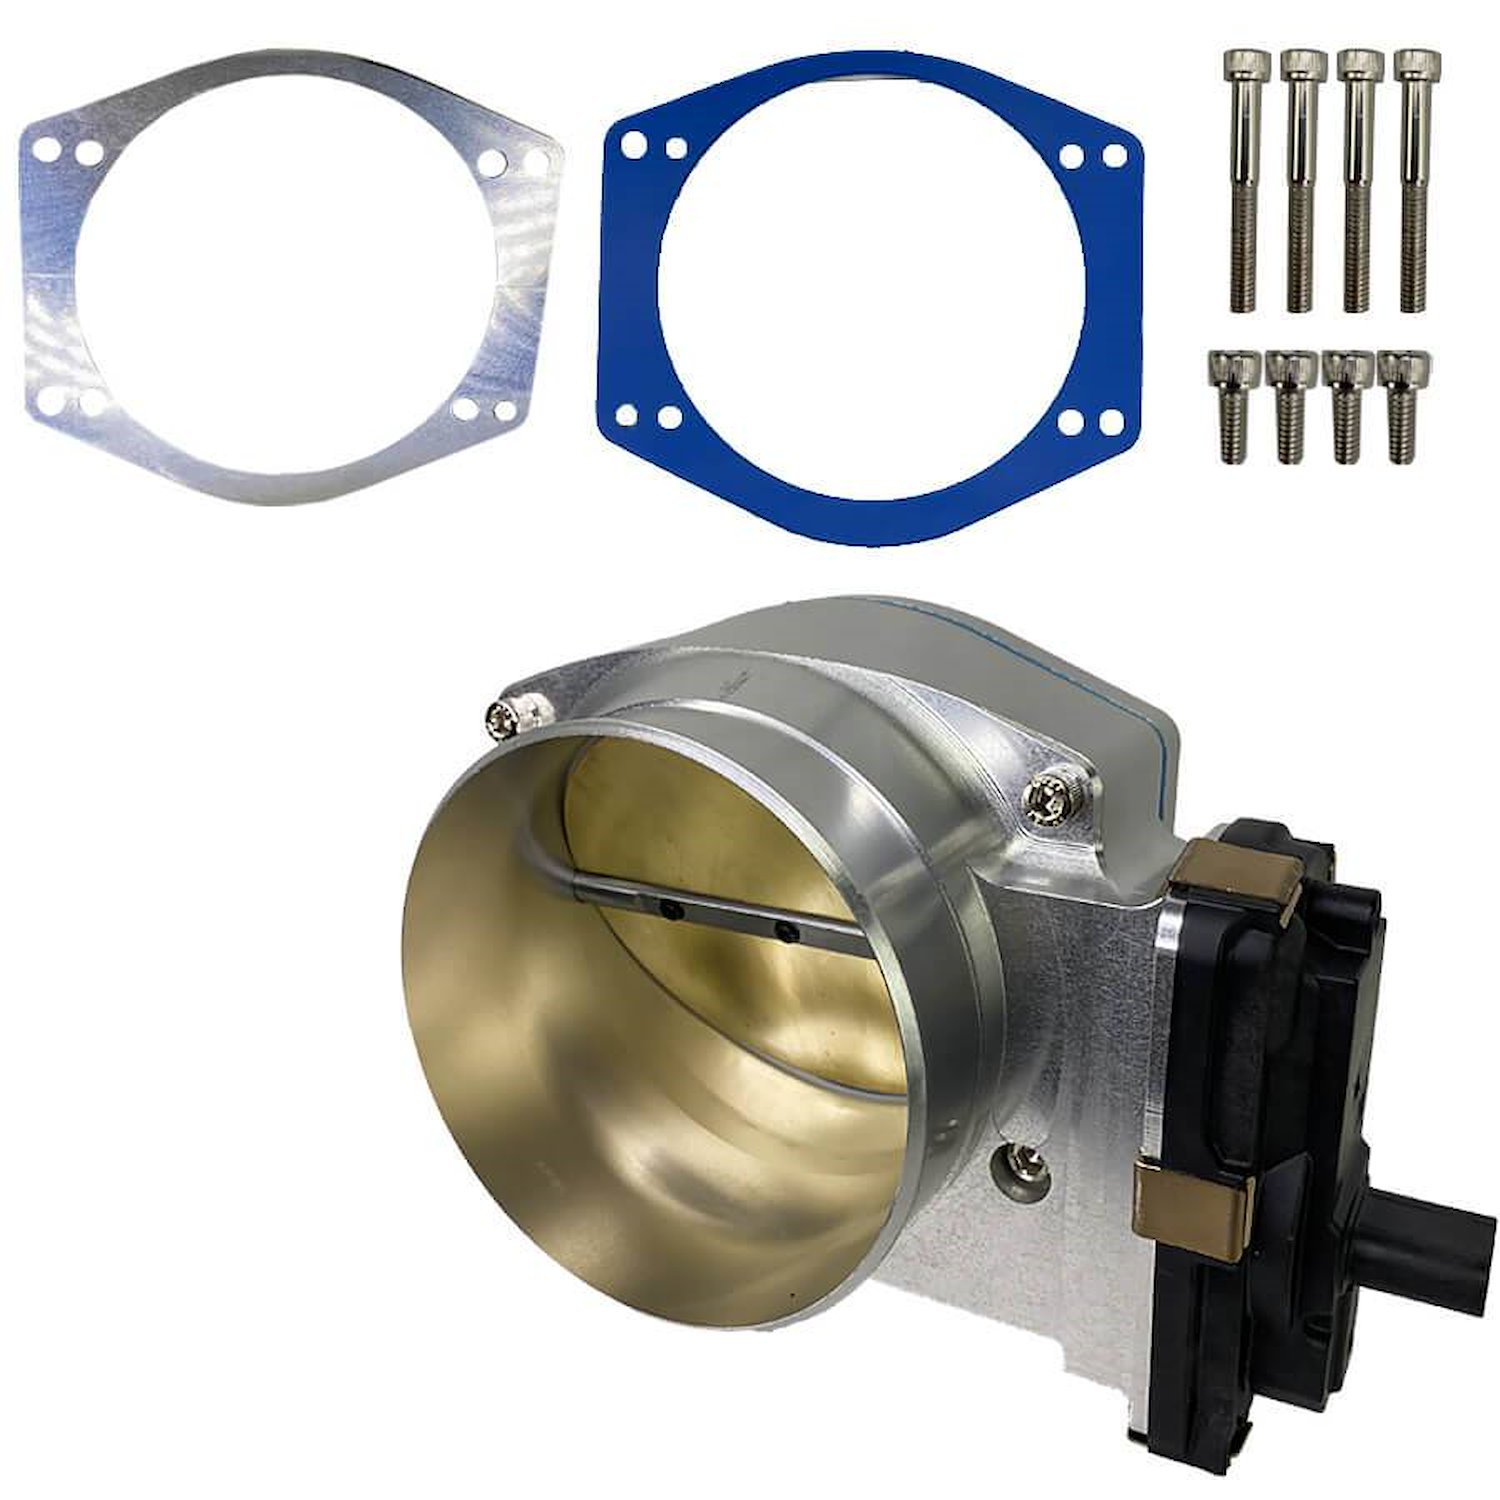 Drive-By-Wire Throttle Body GM LT1/LT4, 112 MM - Natural Finish